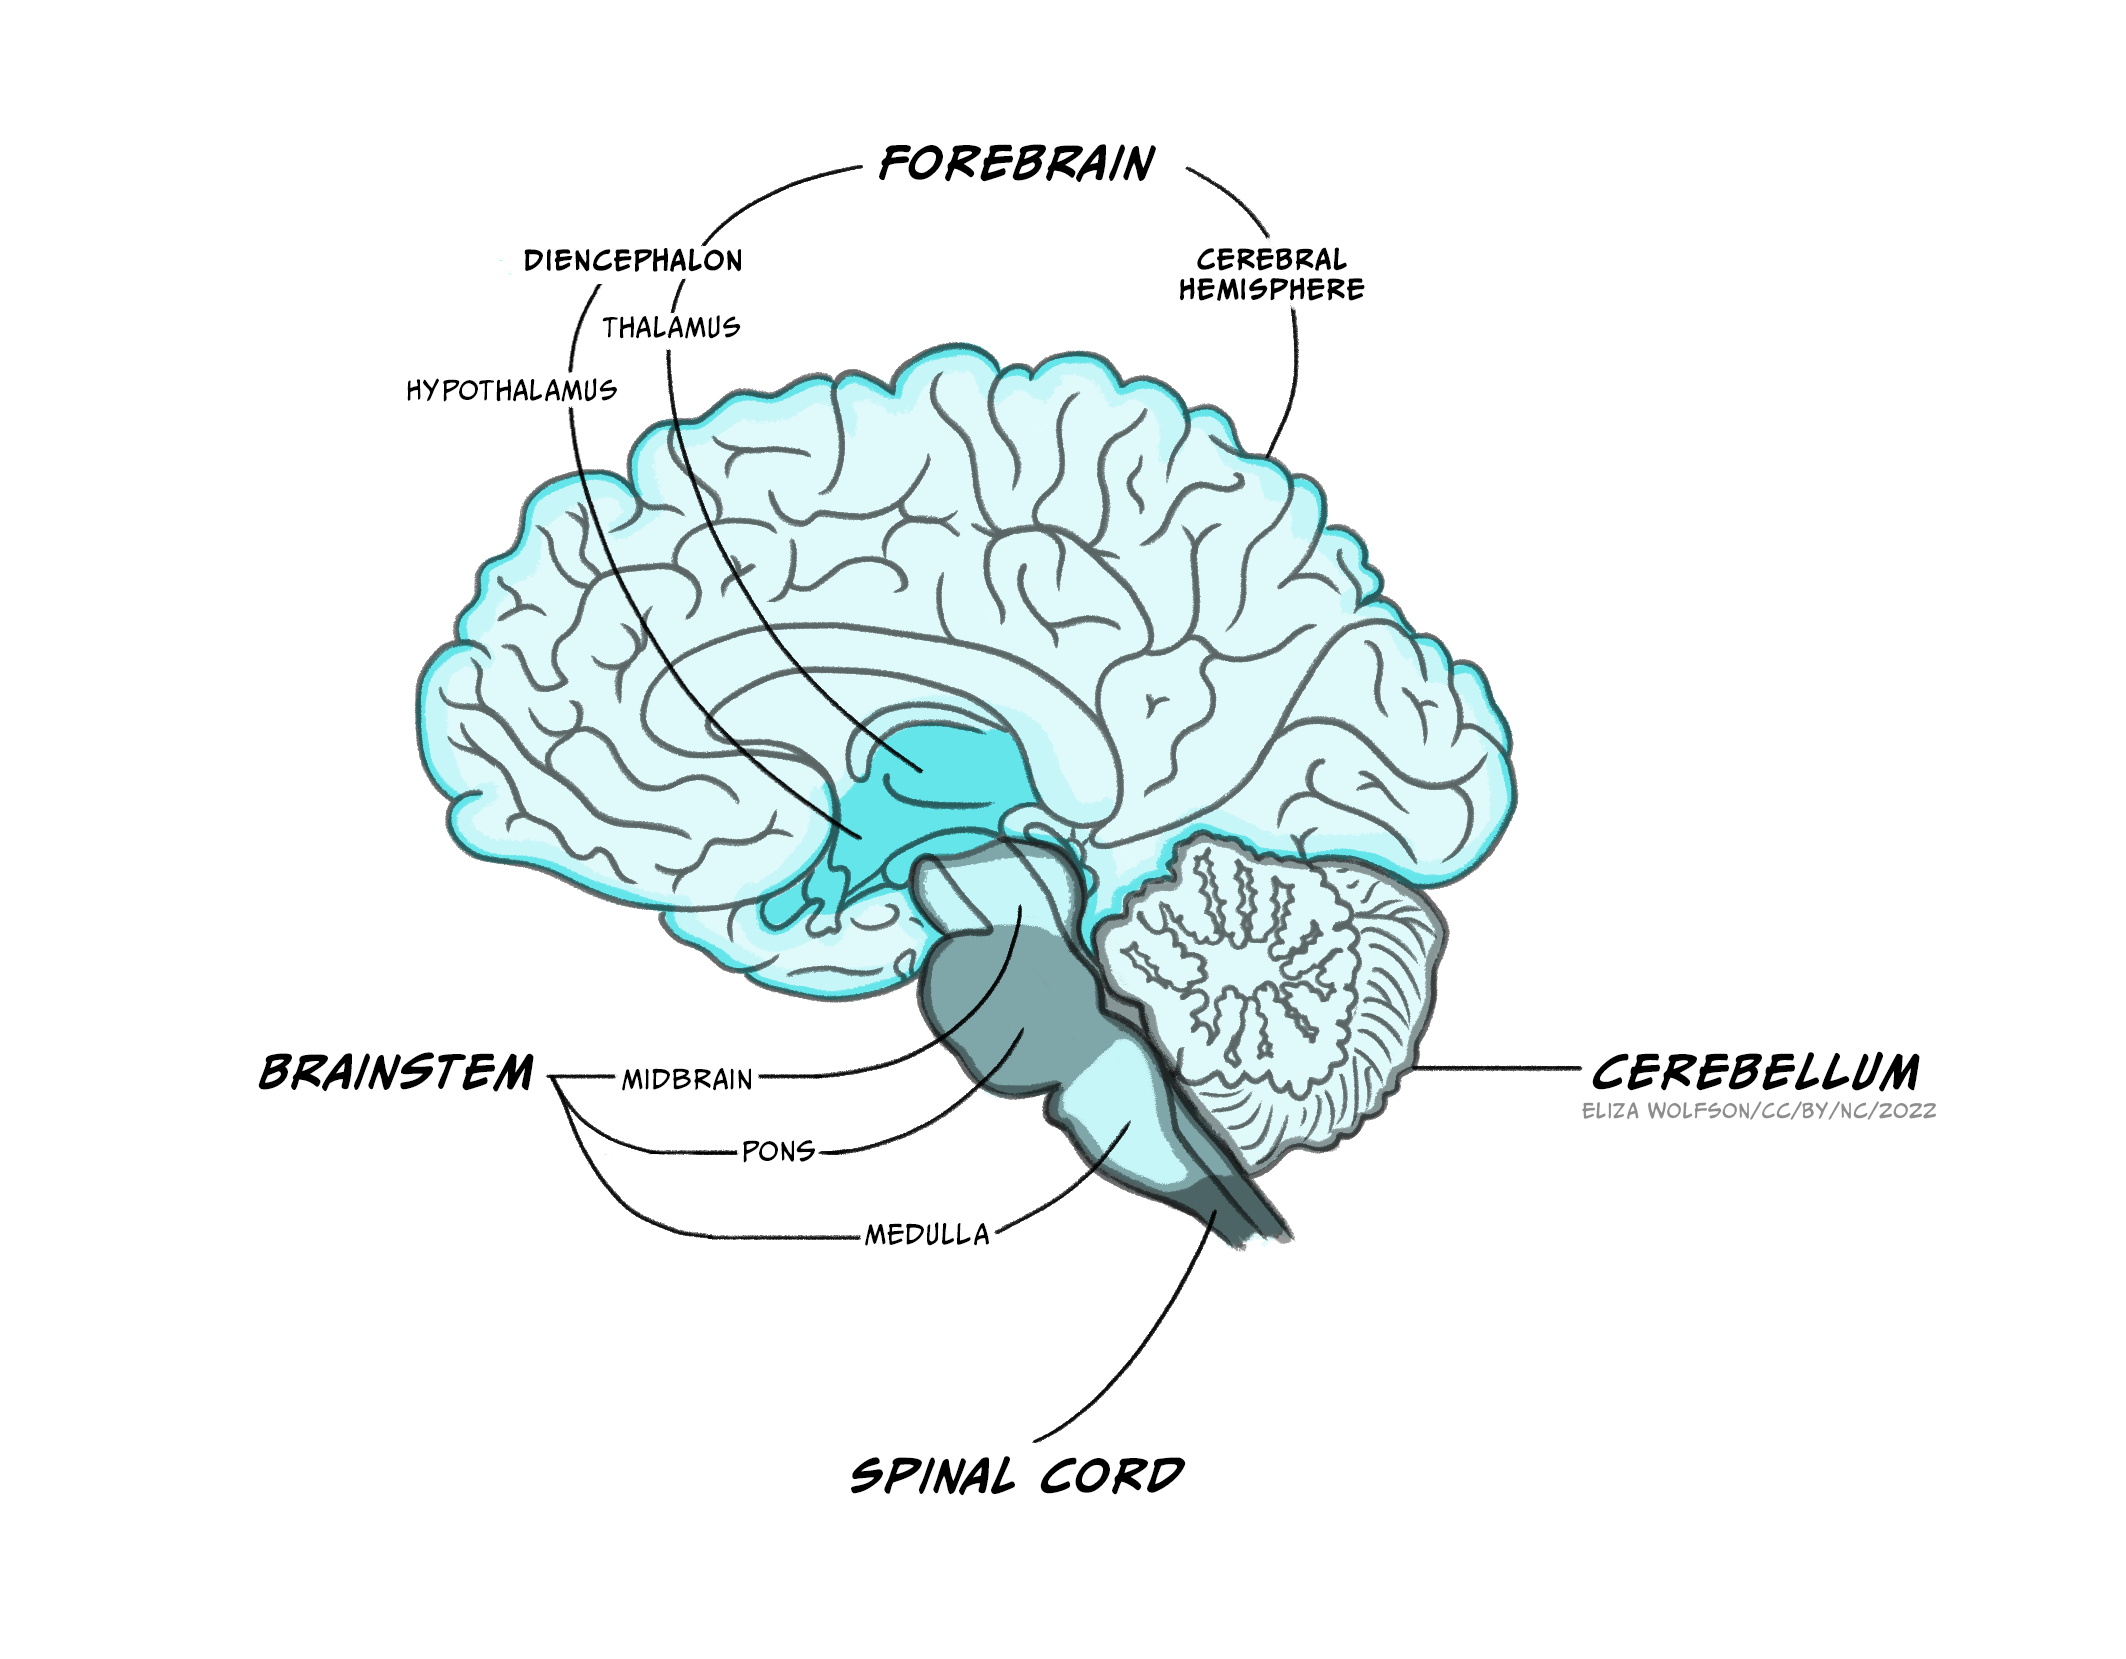 Lateral view of the brain showing the brainstem, the cerebellum and the forebrain.